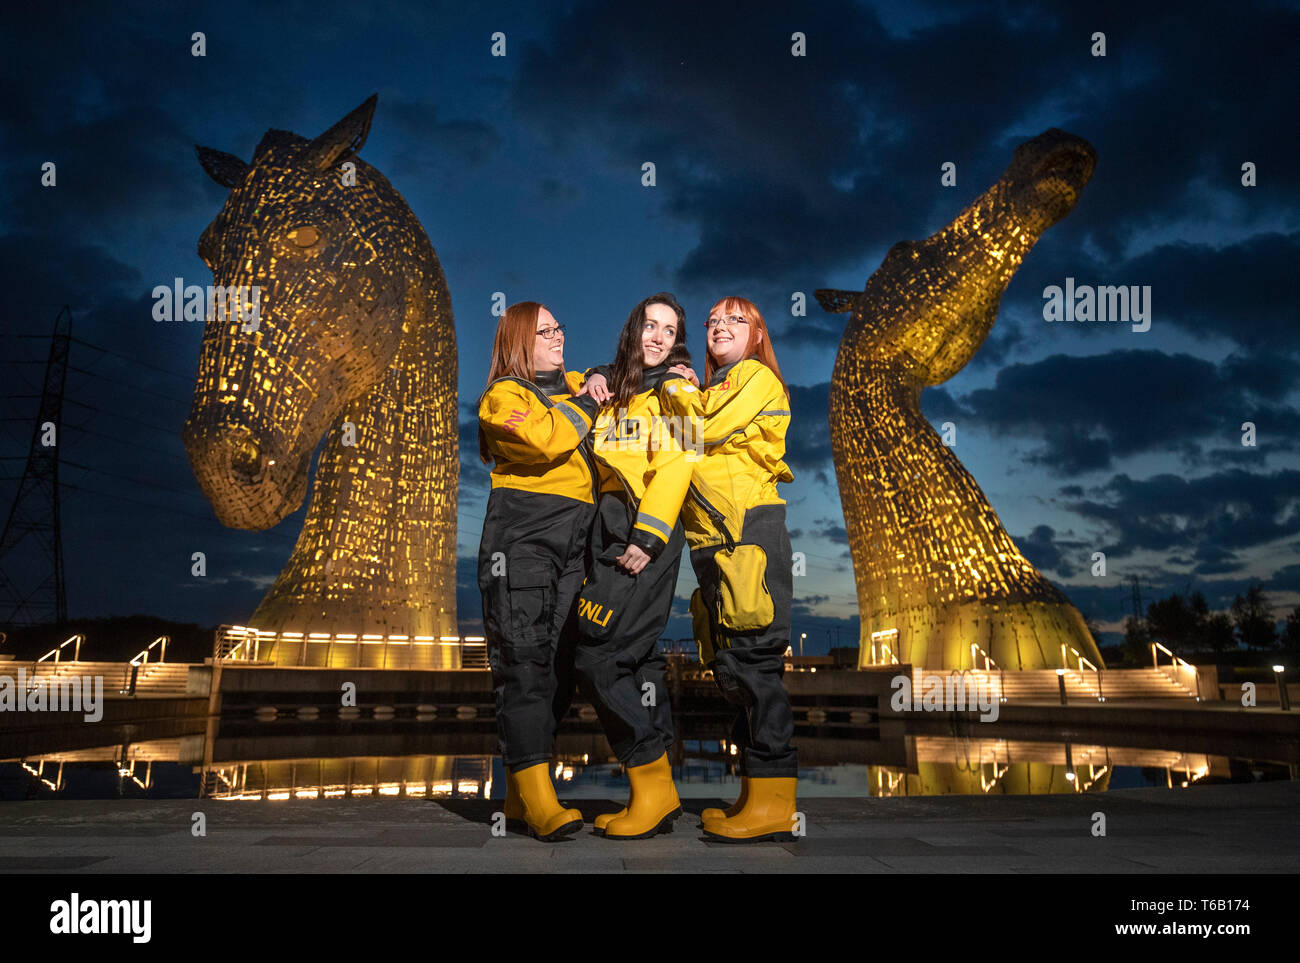 Members of the Queensferry crew (left to right) Adele Allan Arabella Kuszynska-Shields and Denise Tyler help launch the RNLI's 2019 Mayday campaign in front of The Kelpies, Falkirk, which is one of several landmarks across Scotland lit up yellow. Stock Photo